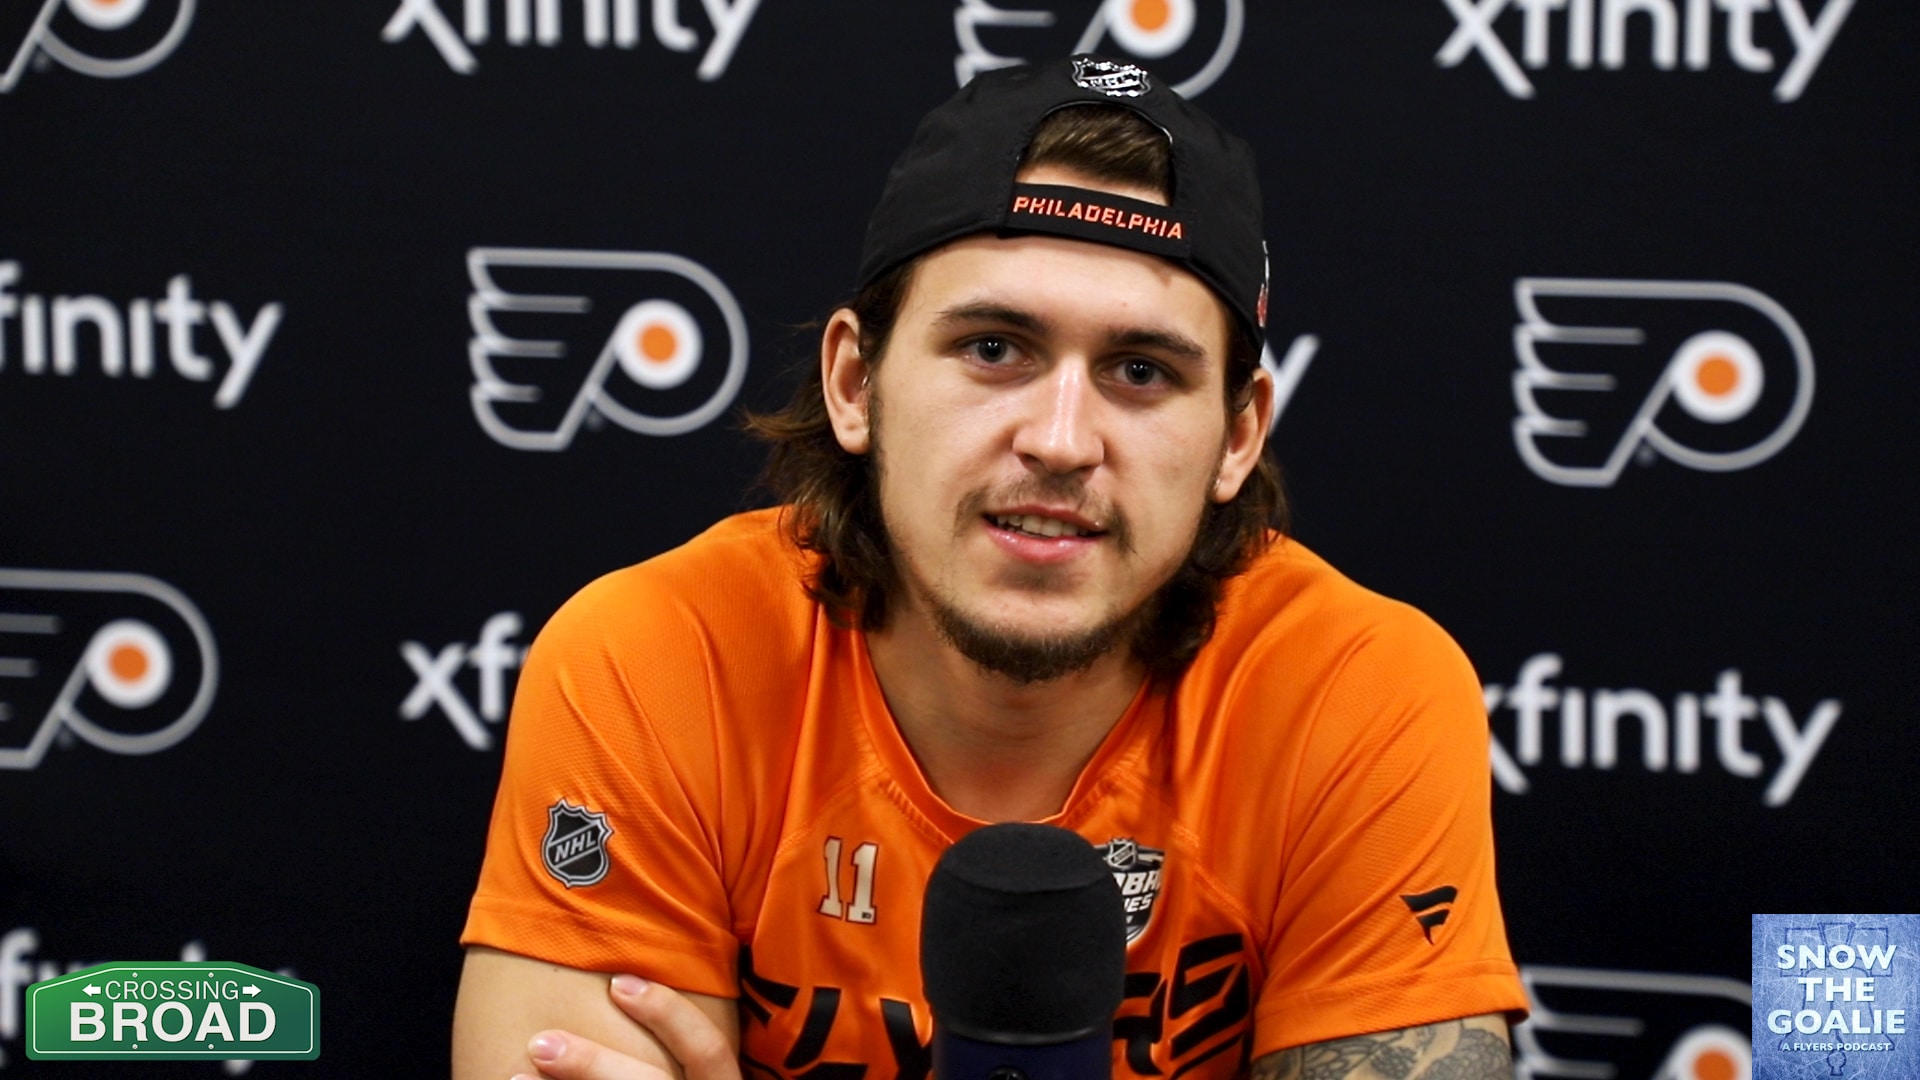 Snow The Goalie: Making an All-Star with Flyers Forward Travis Konecny